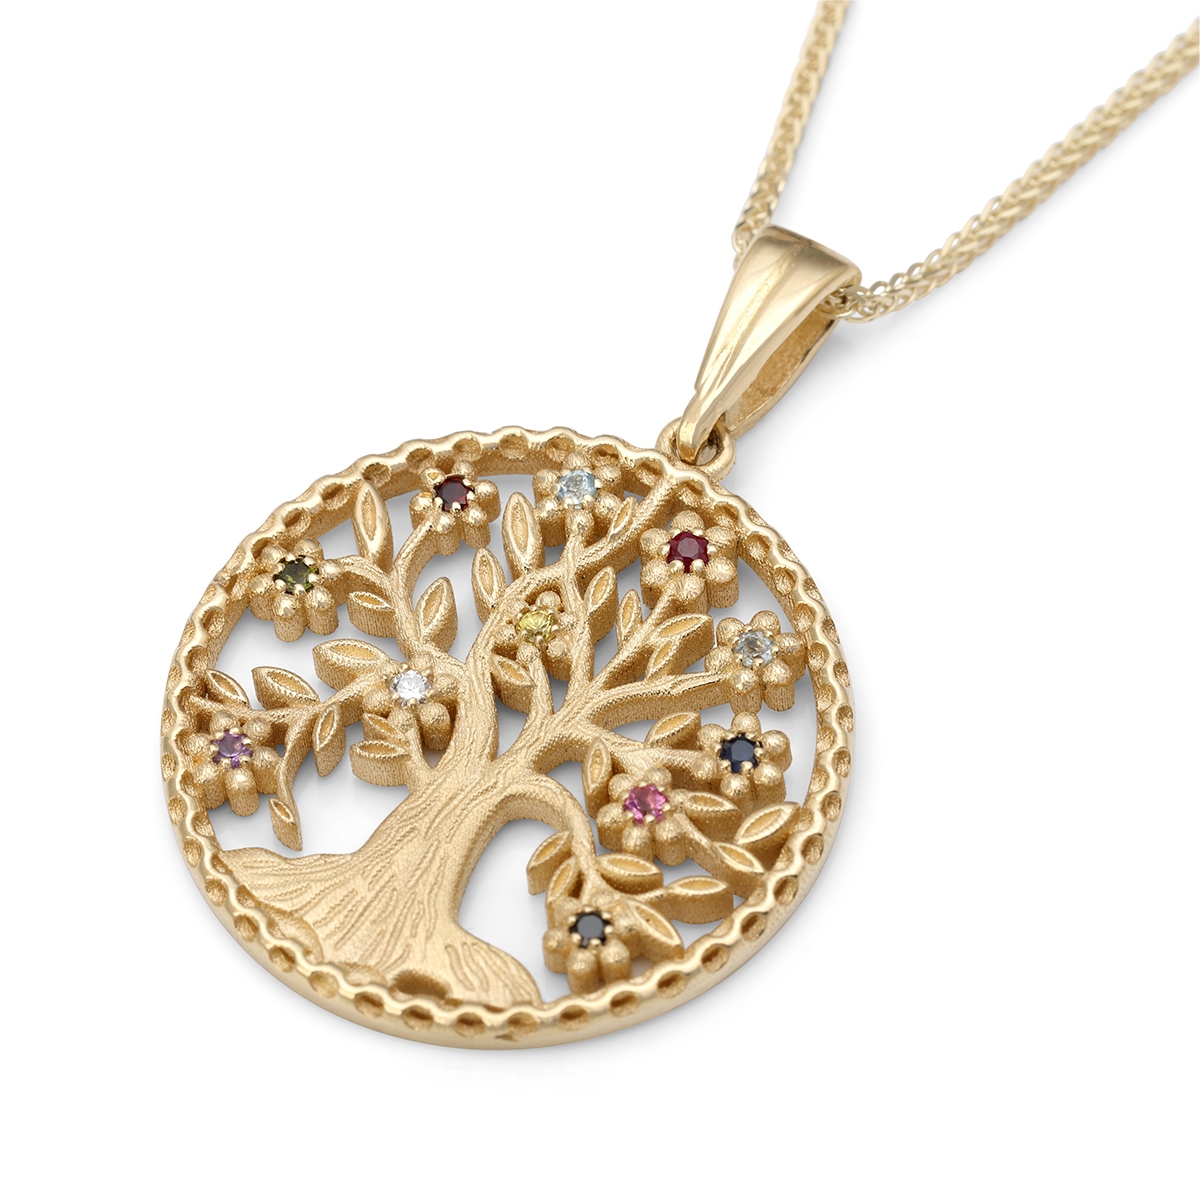 Round 14K Yellow Gold Tree of Life Pendant Necklace With Colorful Gemstones - 1